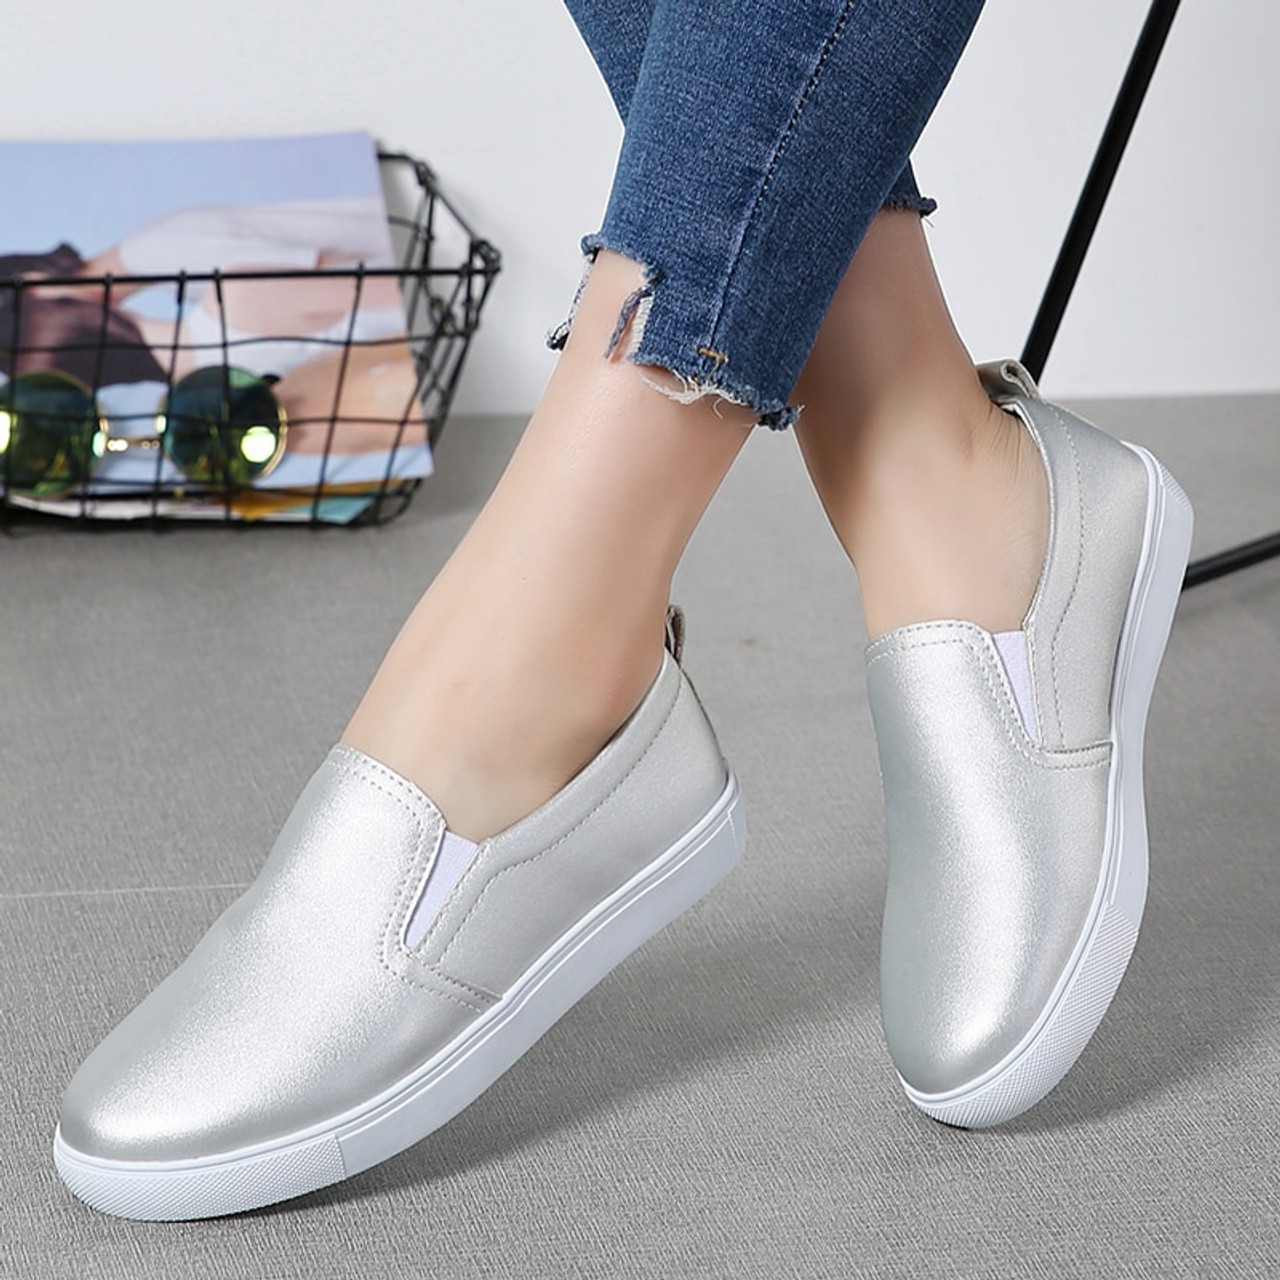 ladies soft casual shoes